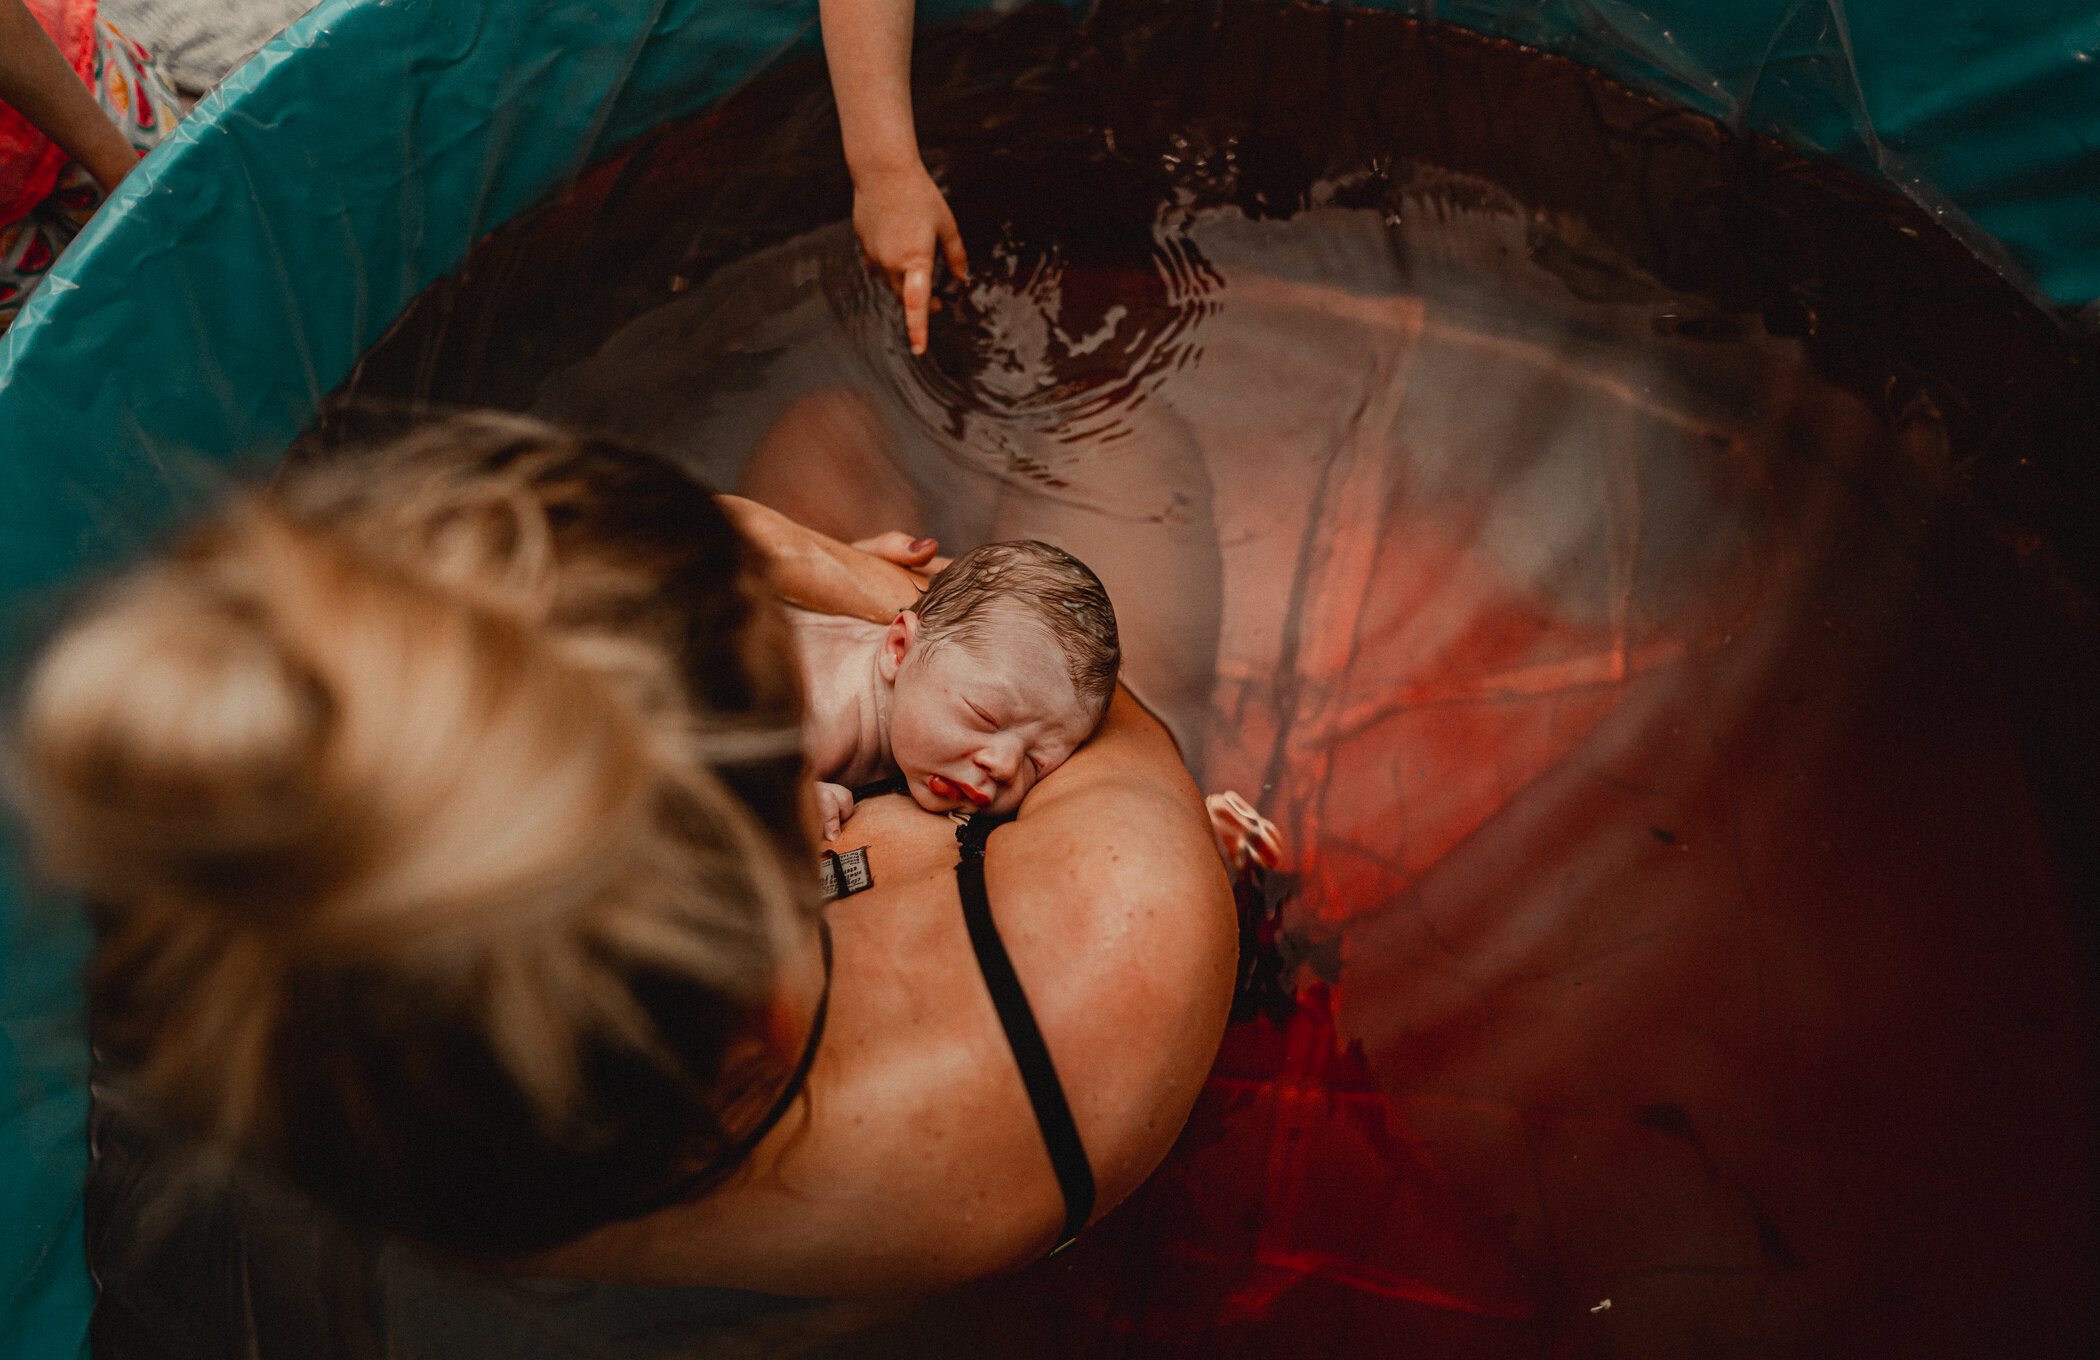 A woman is sitting in the birth pool holding her newborn son who is sleeping in her arms. A finger is reaching in eagerly waiting to touch baby brother